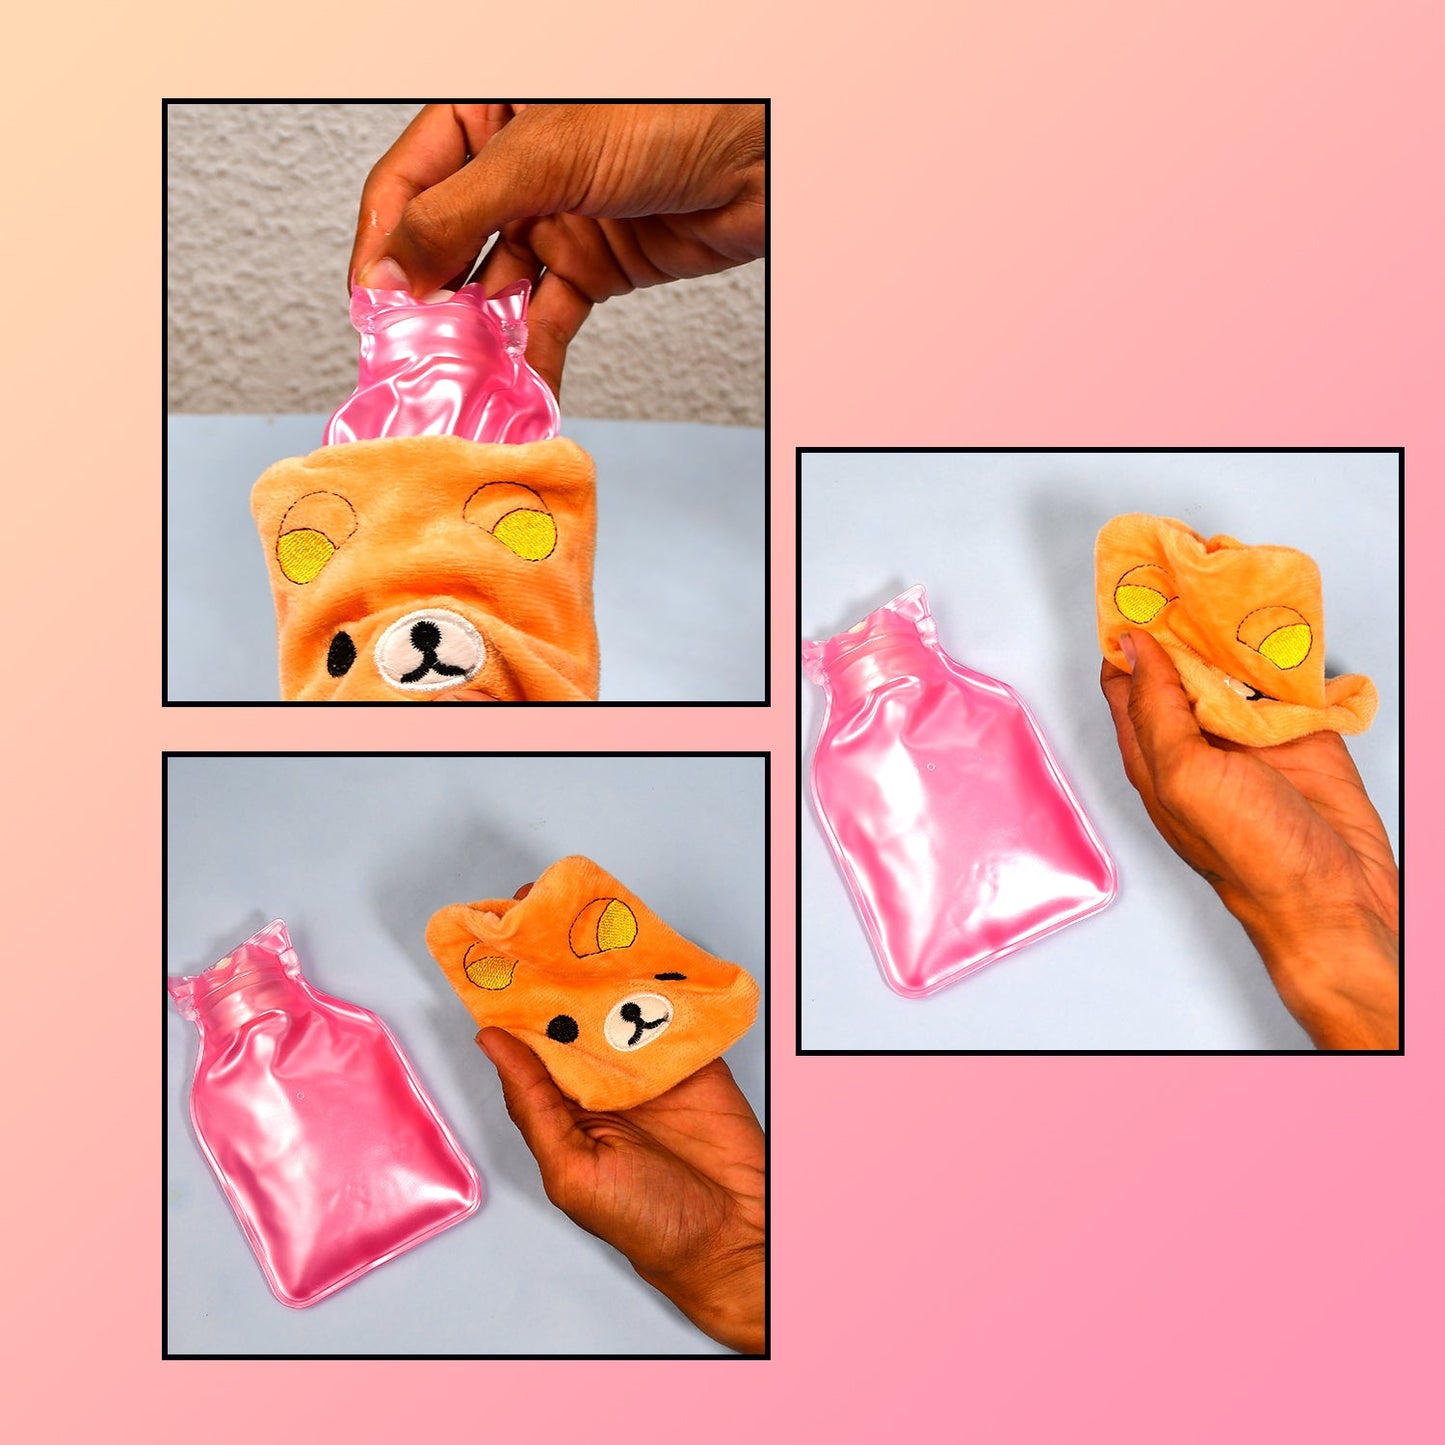 6503 Orange Panda small Hot Water Bag with Cover for Pain Relief, Neck, Shoulder Pain and Hand, Feet Warmer, Menstrual Cramps. DeoDap